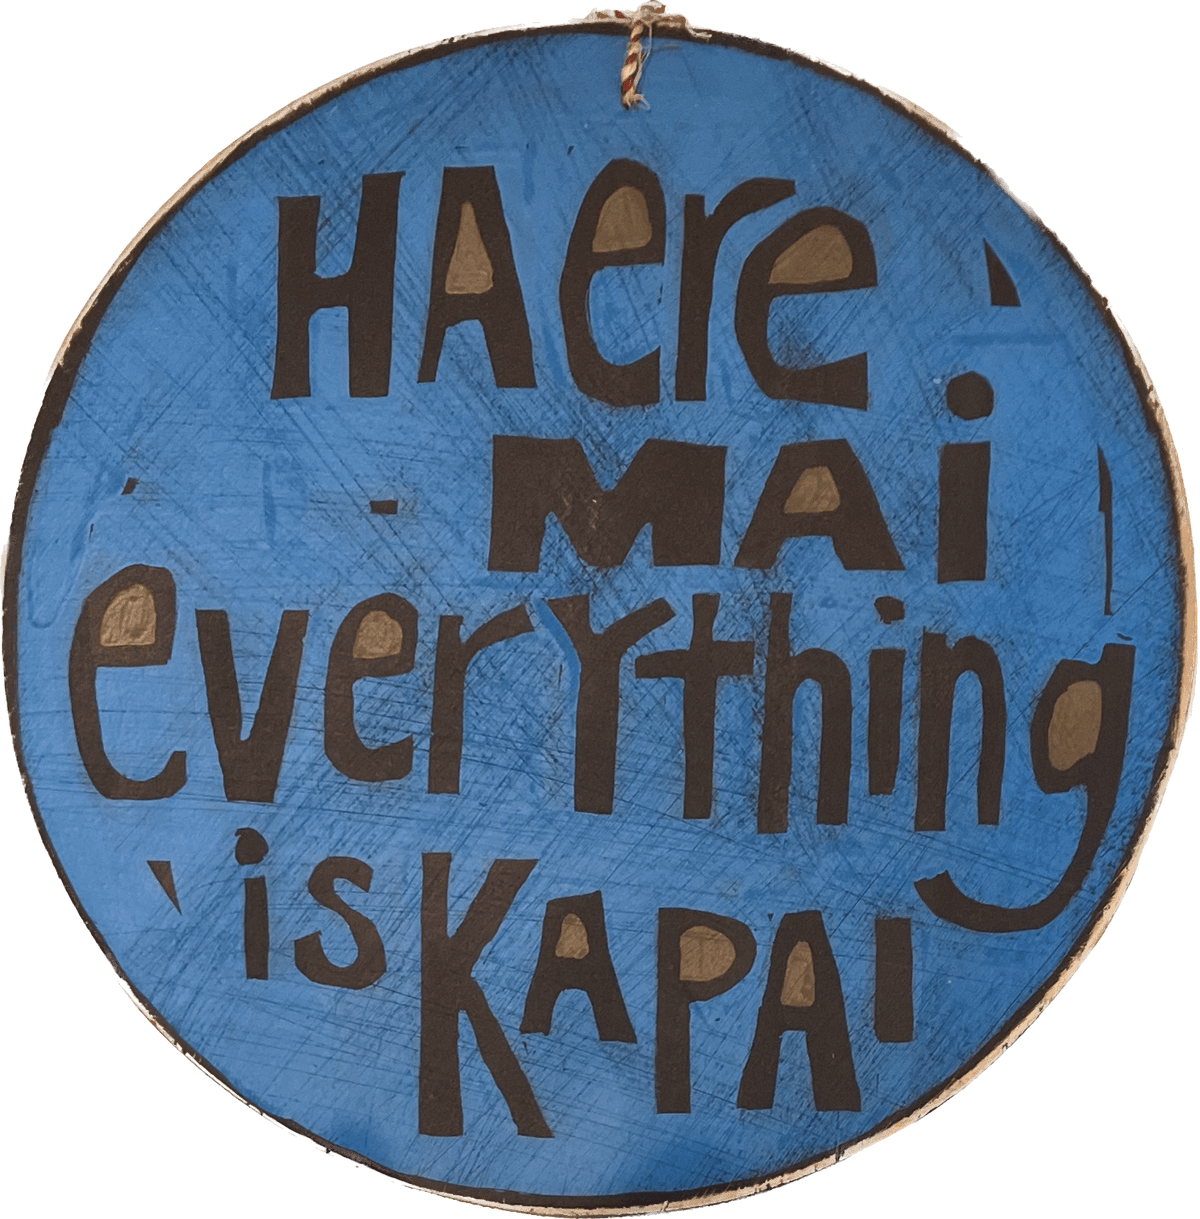 A round piece of wall art with the words 'Haere mai everything is kapai' on it.